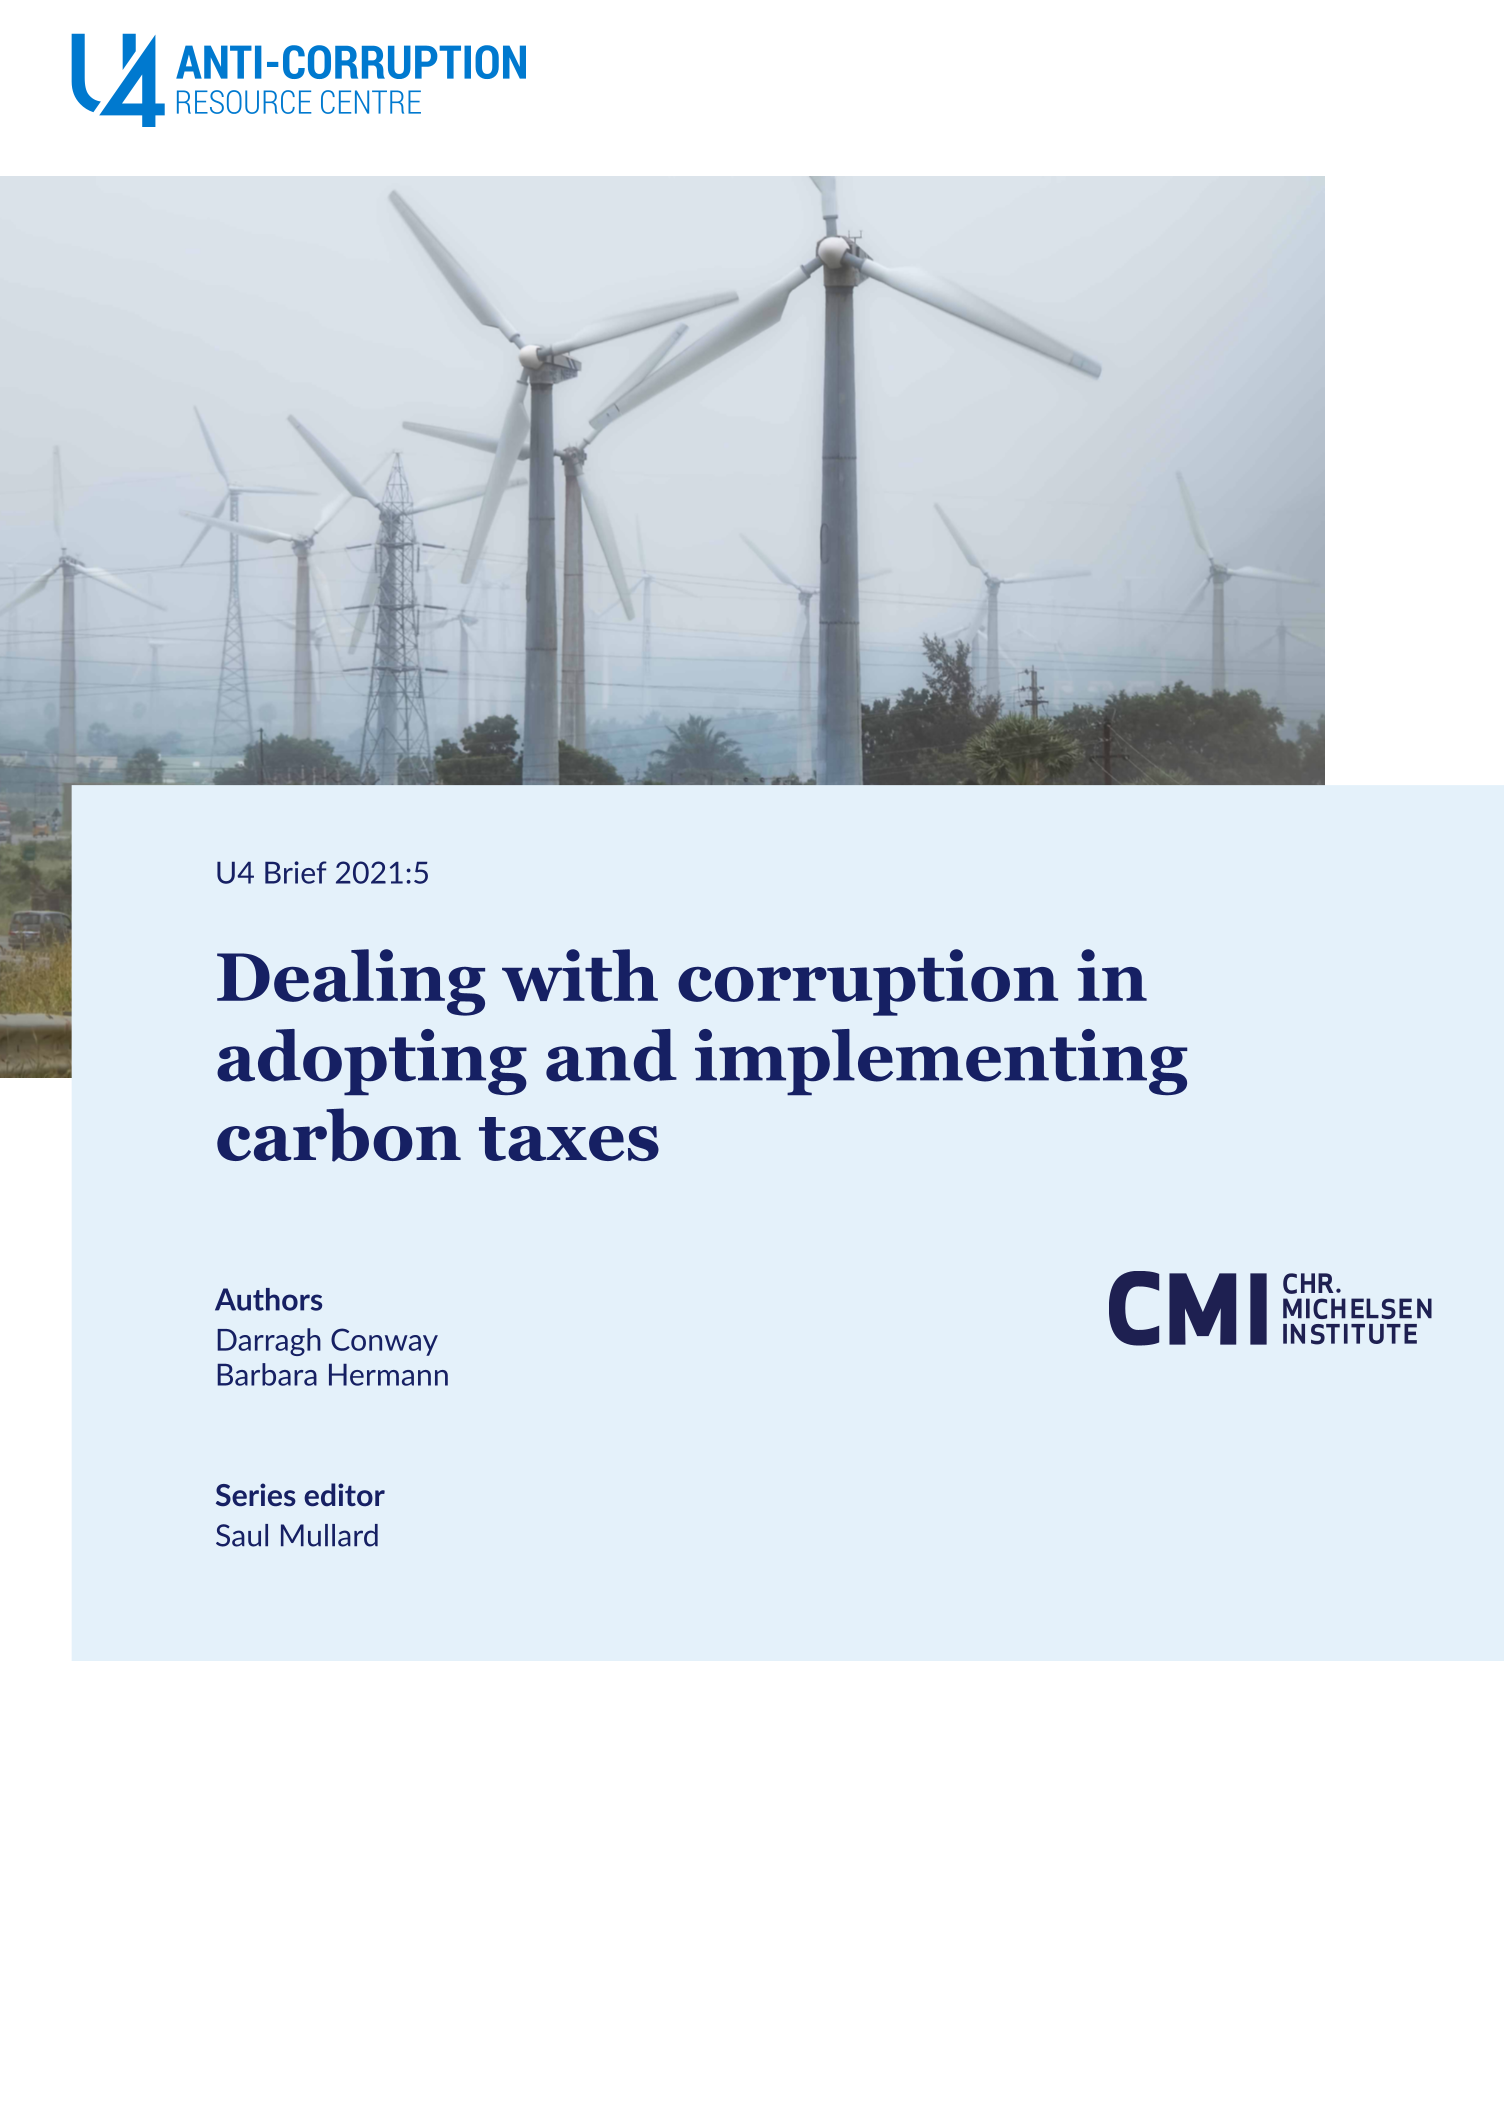 Dealing with corruption in adopting and implementing carbon taxes